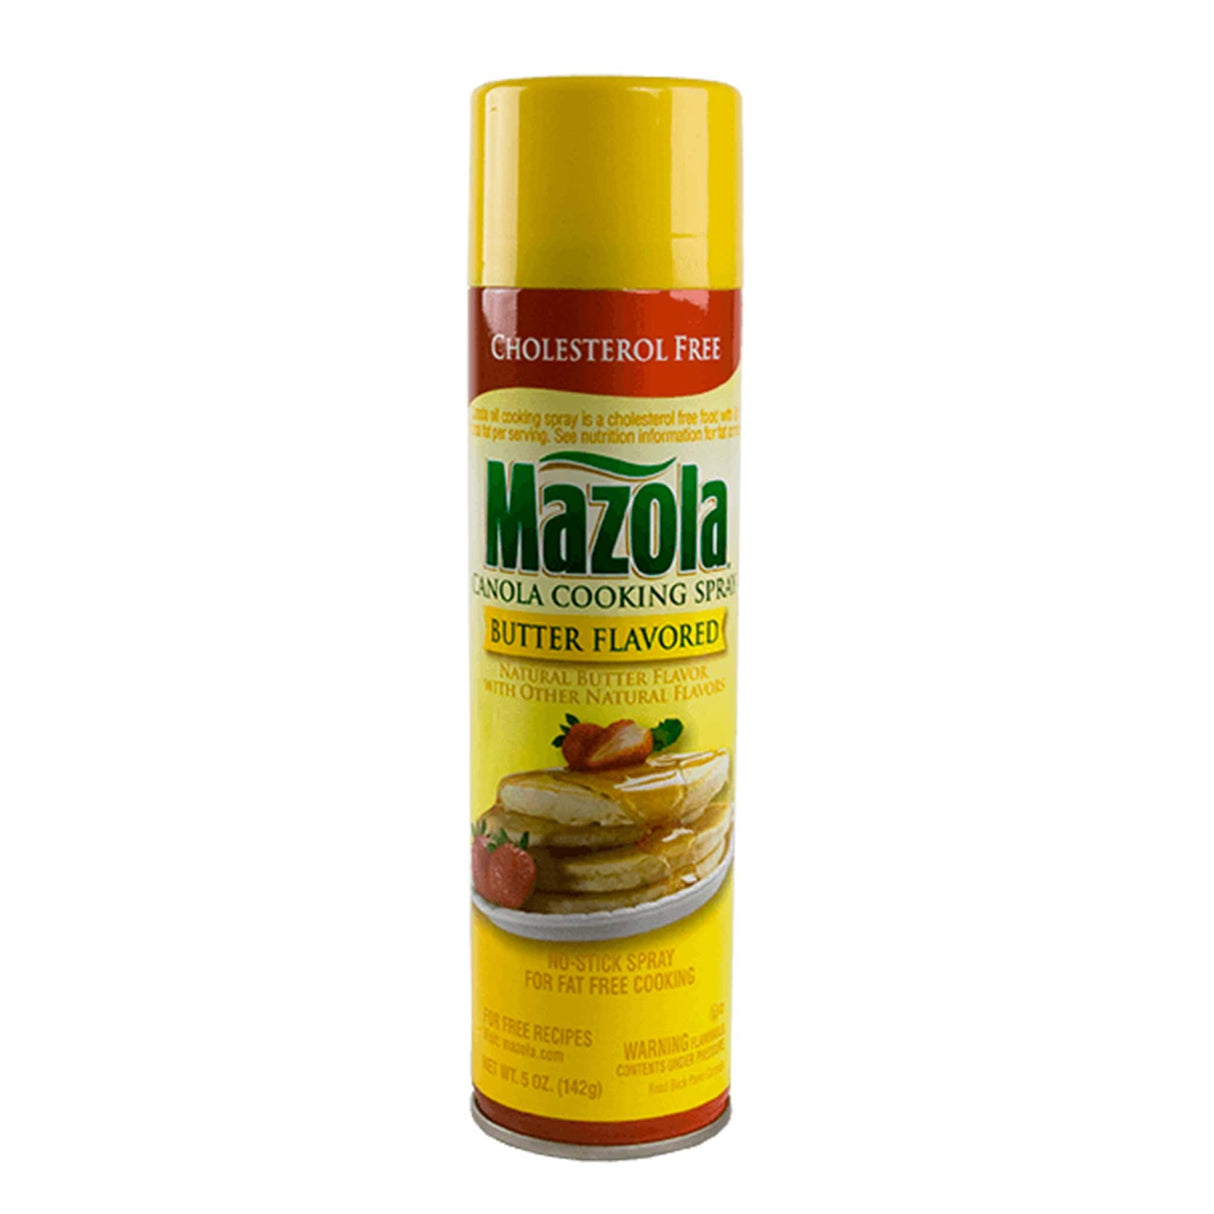 Mazola Canola Oil Cooking Spray Butter Flavored